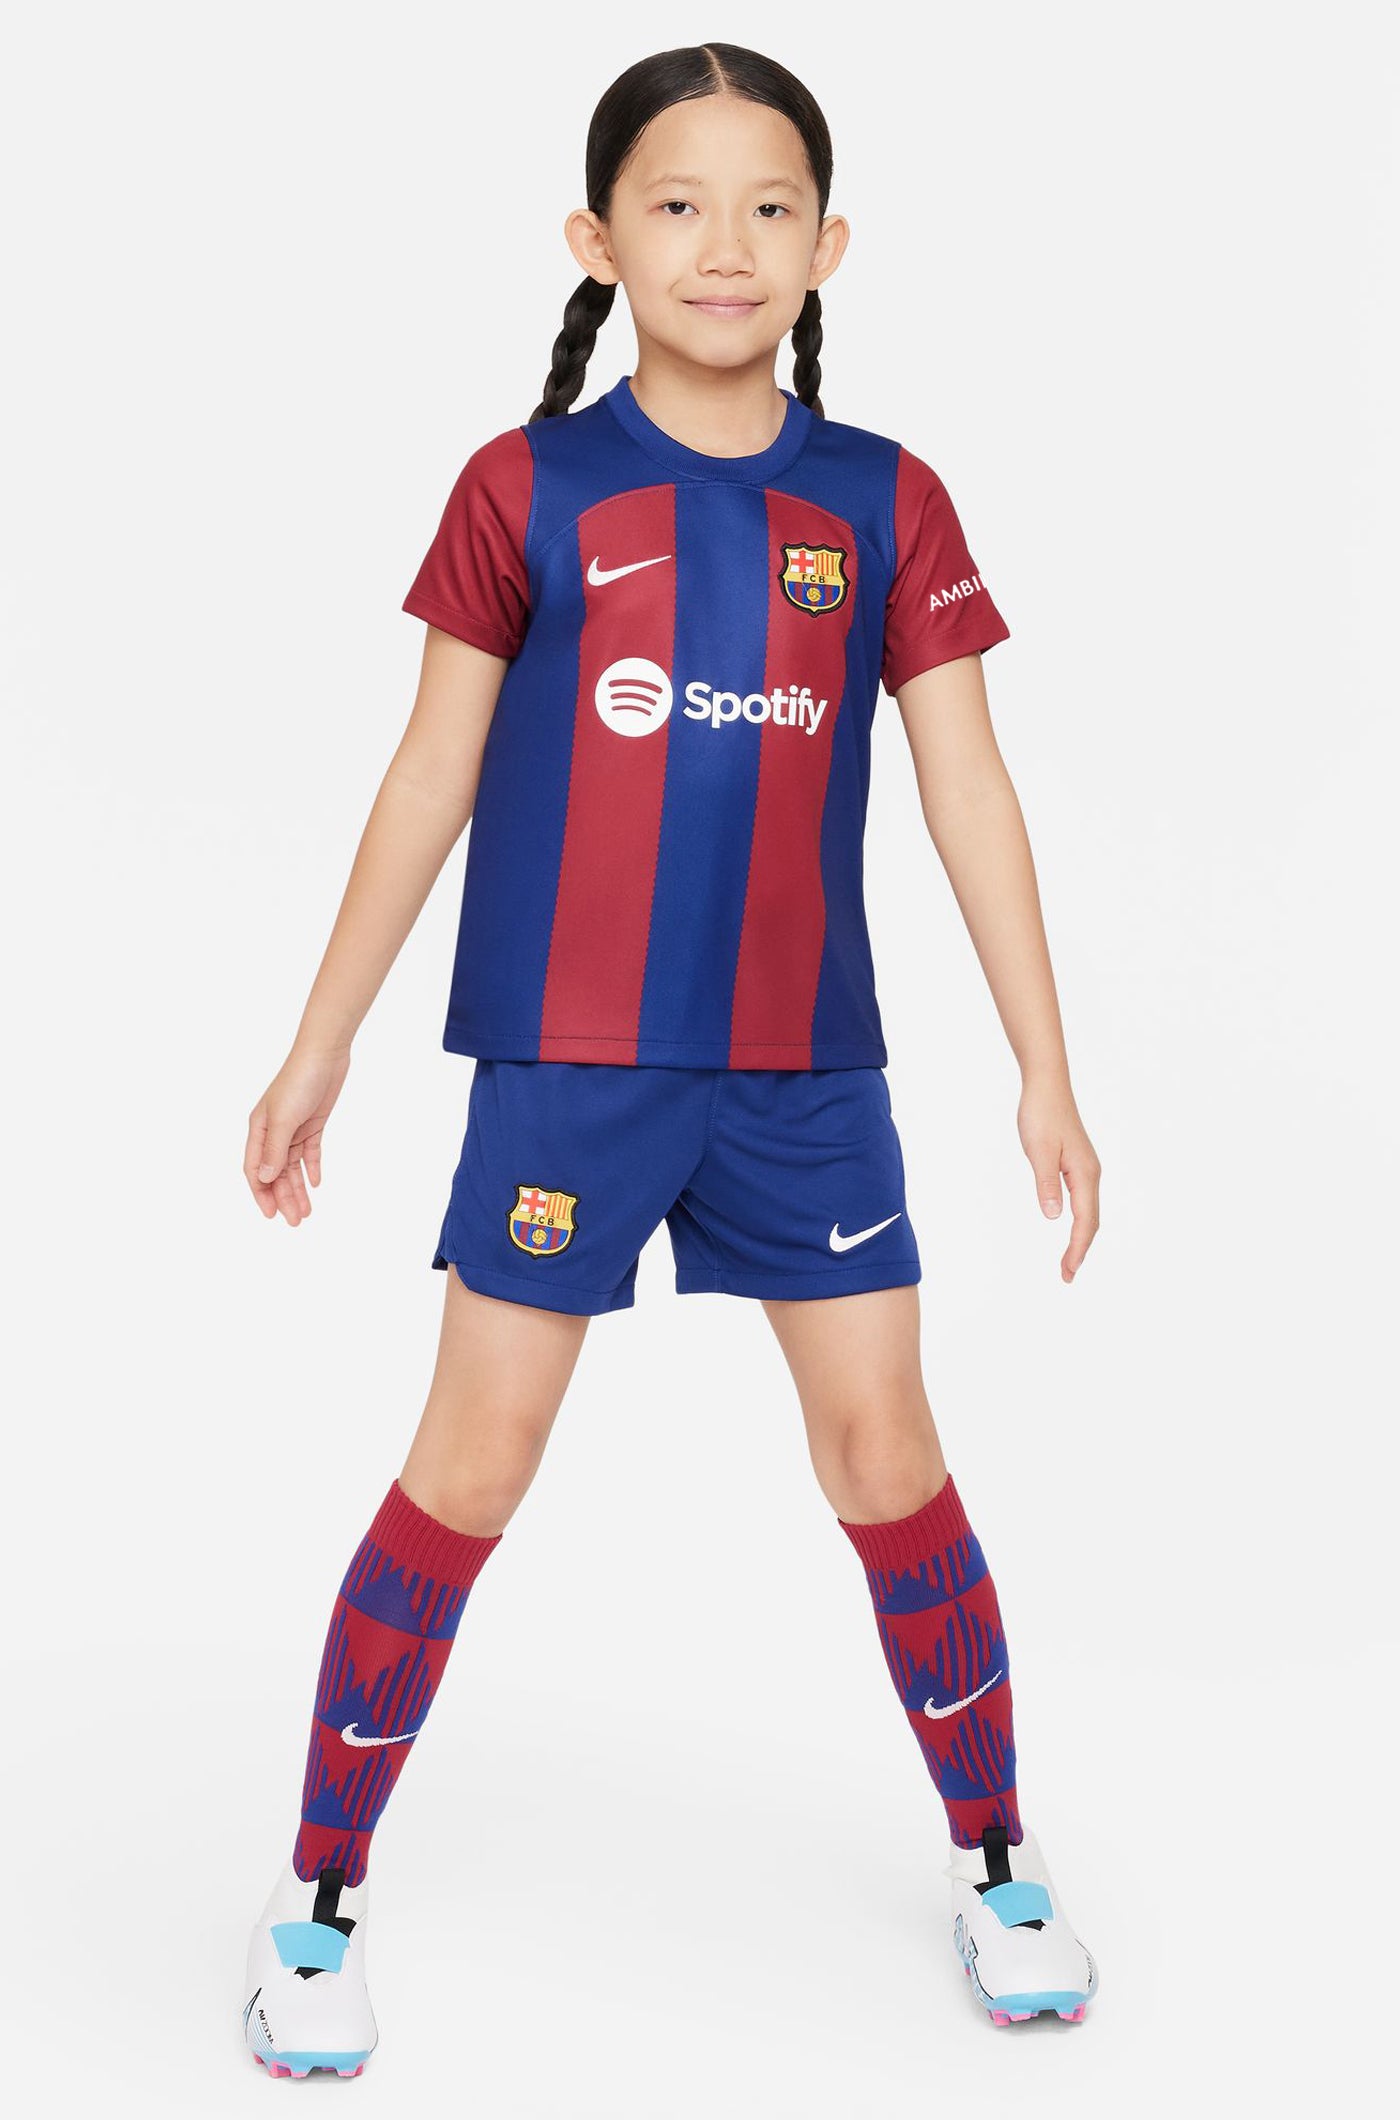 FC Barcelona home Kit 23/24 - Younger Kids  - MARCOS A.